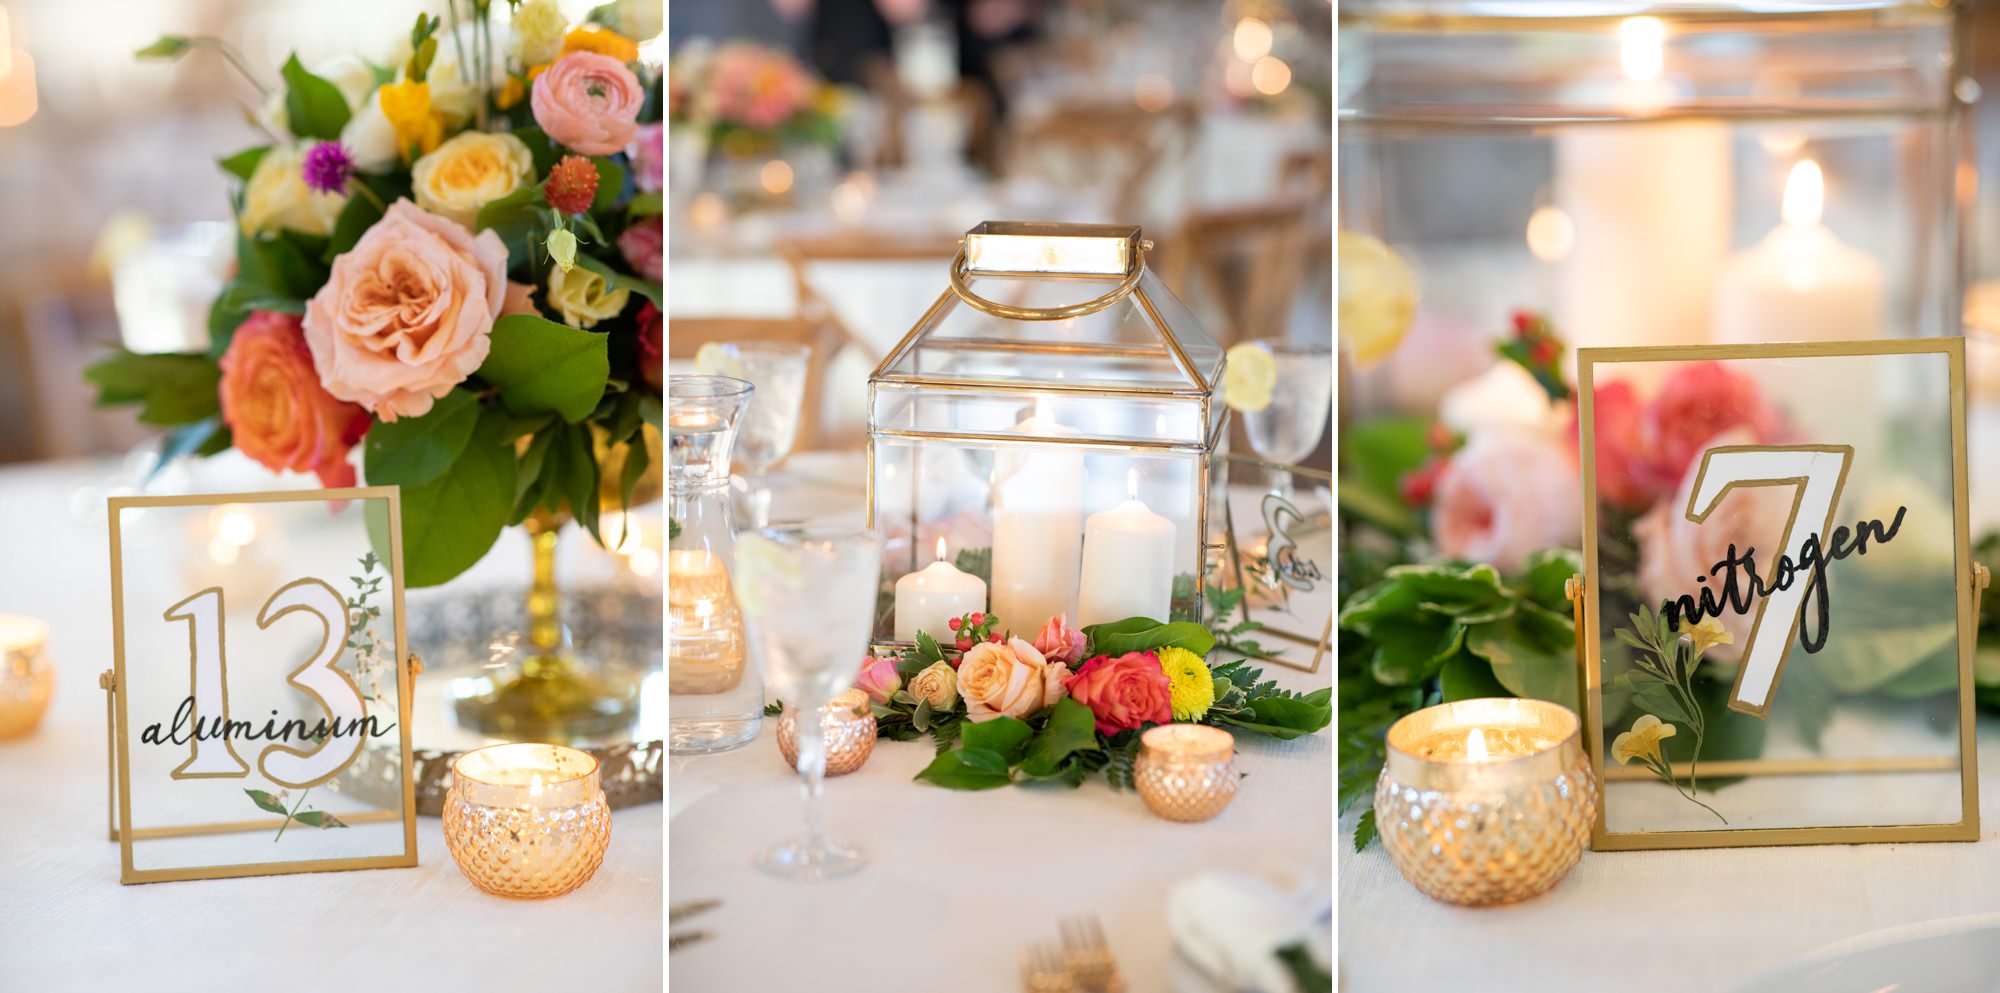 Simply Perfect Events with Lindsay Hocker